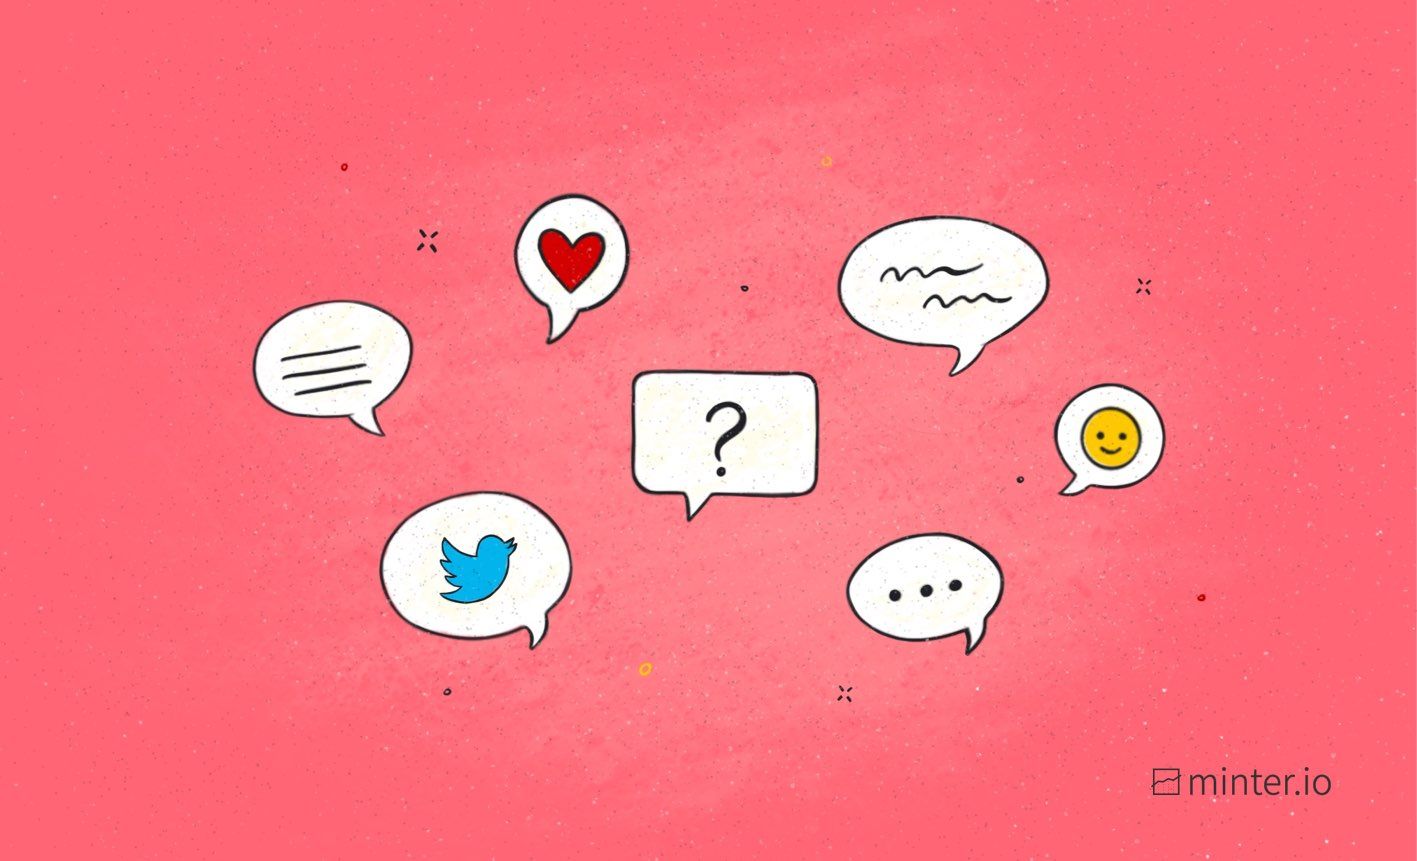 Your business should have a customer service Twitter account